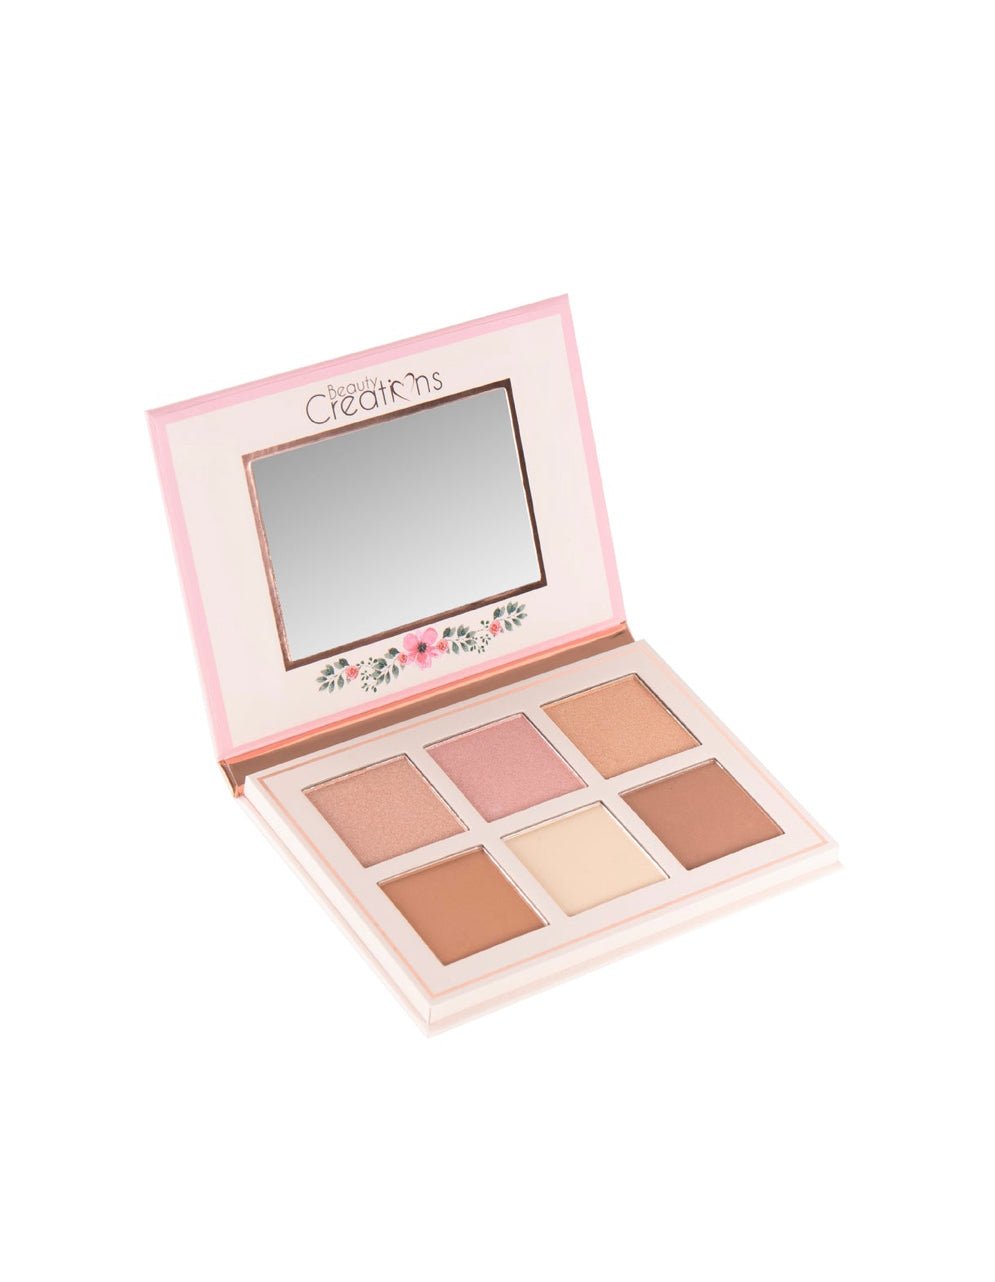 BEAUTY CREATIONS - FLORAL BLOOM HIGHLIGHT & CONTOUR KIT - DISPLAY 12 PCS